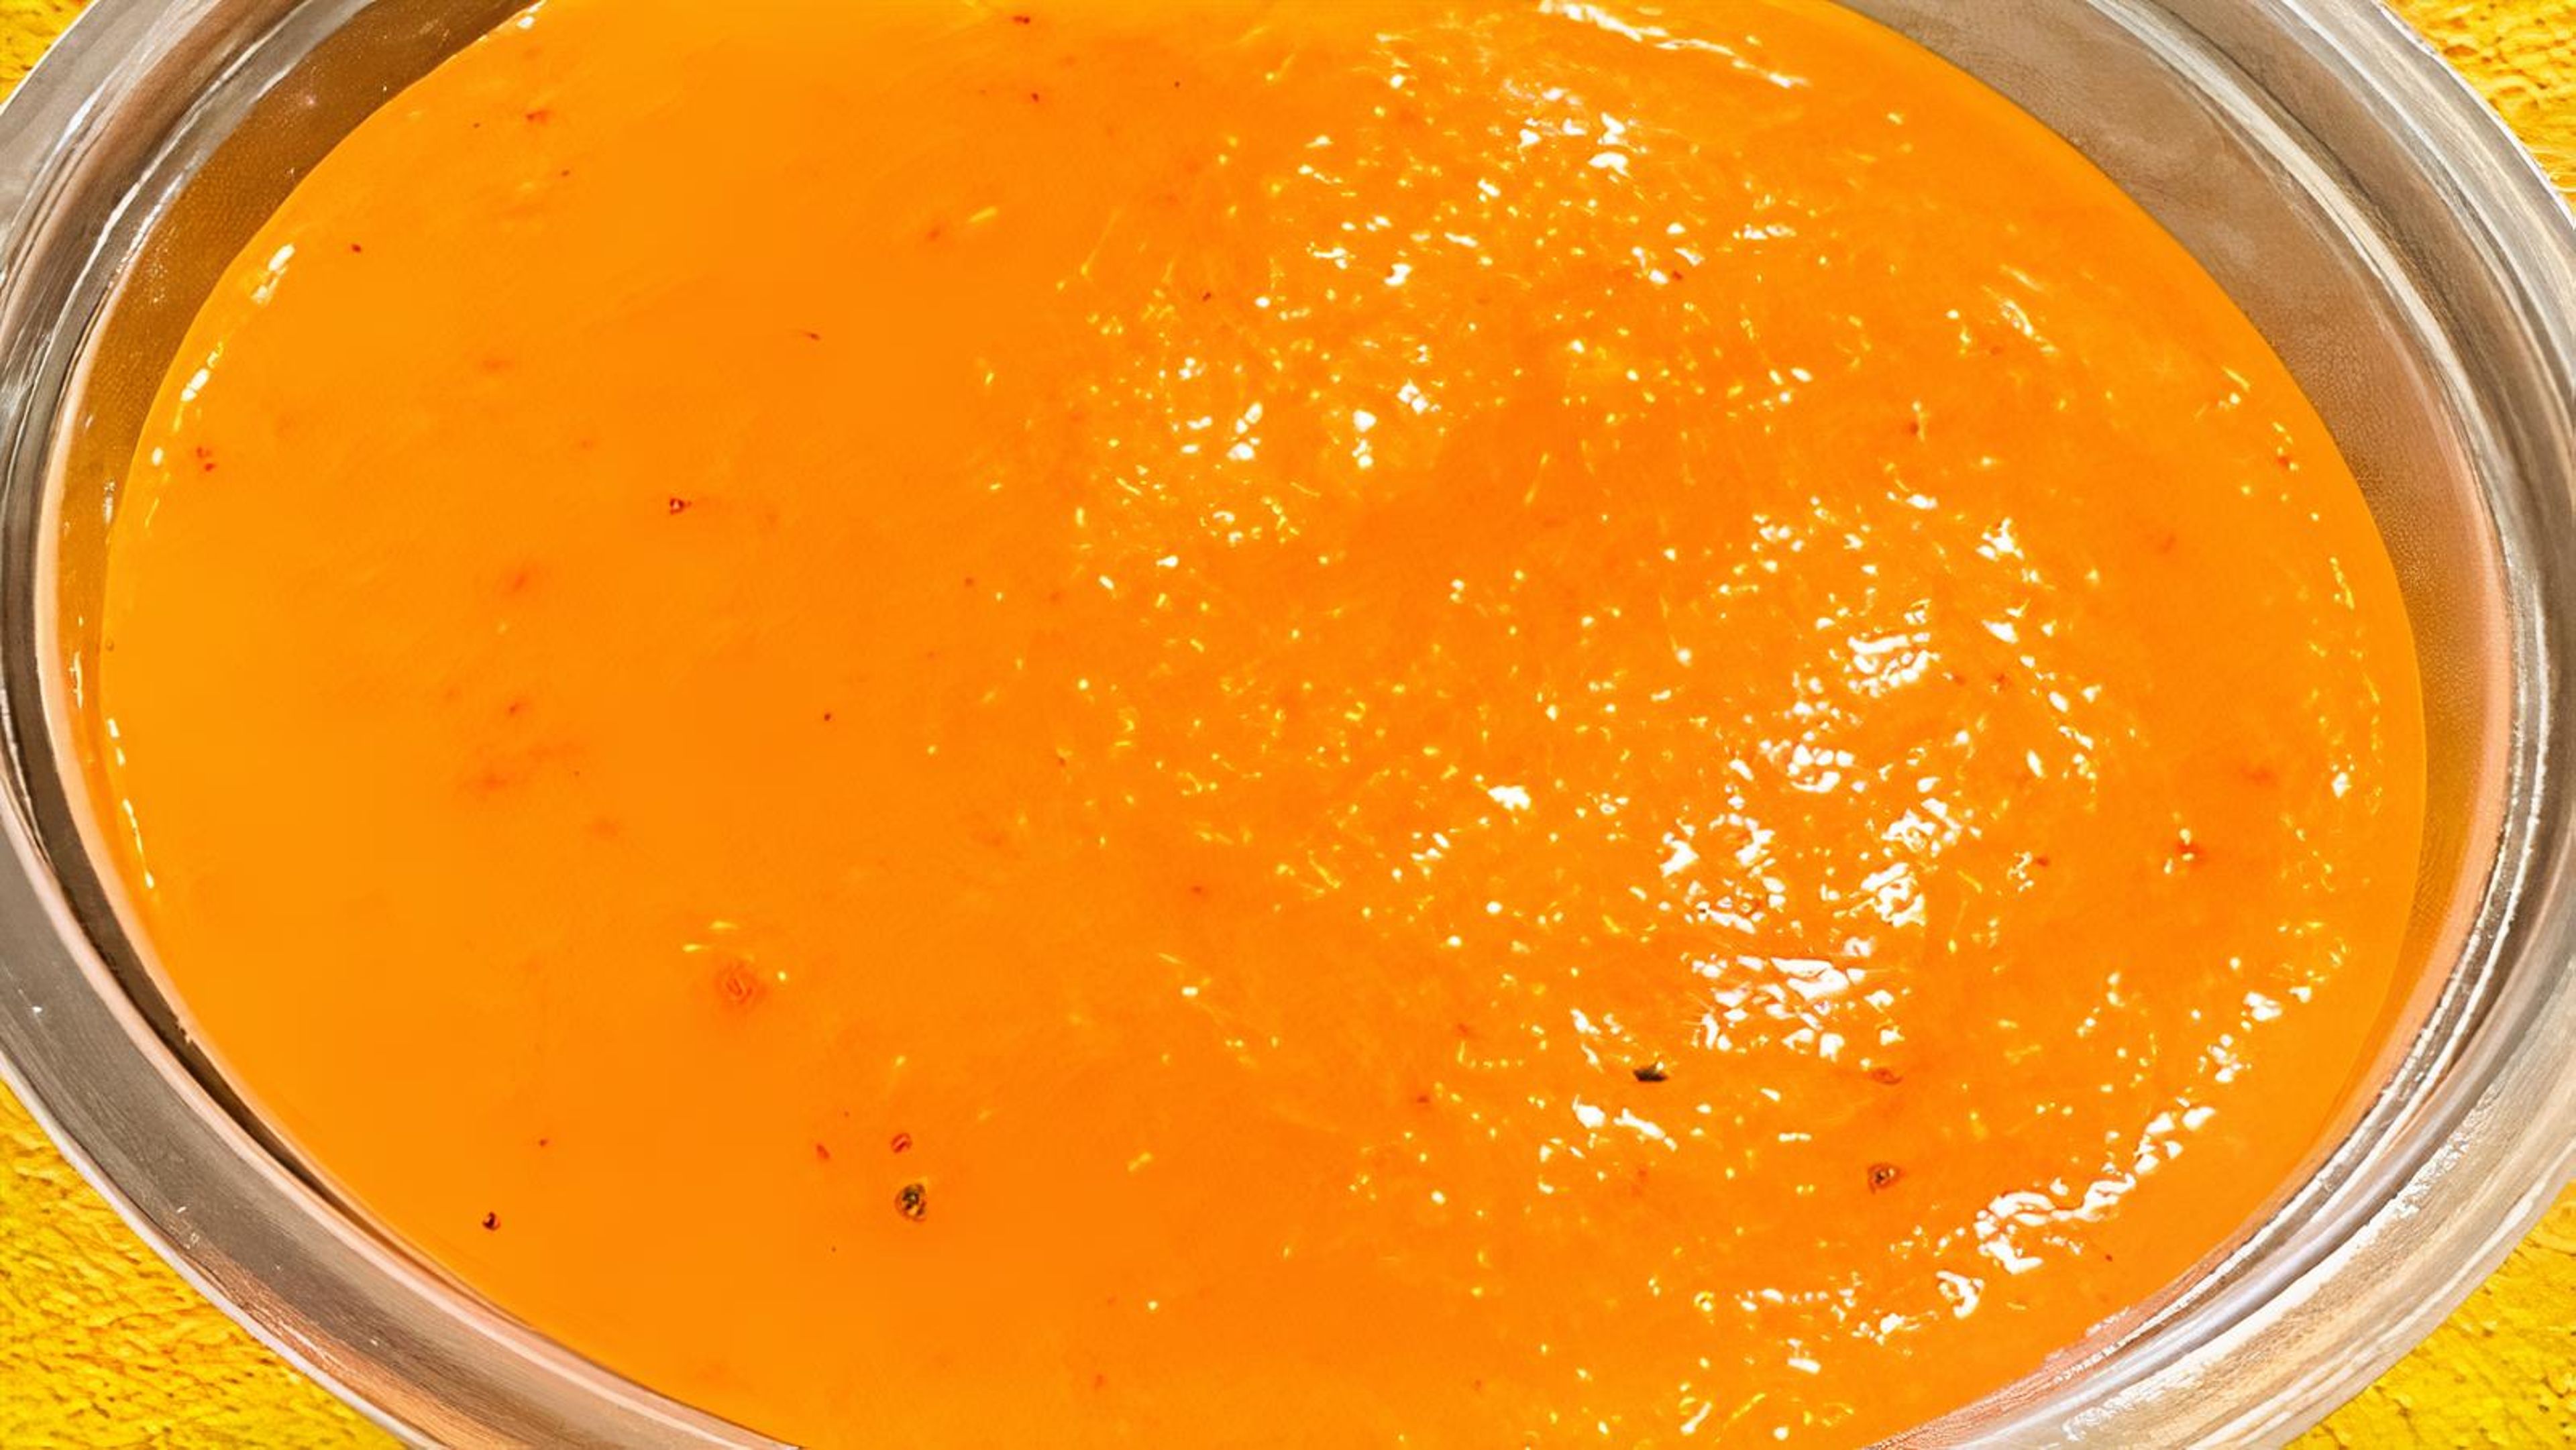 Spicy Roasted Pepper Sauce (3.25oz)